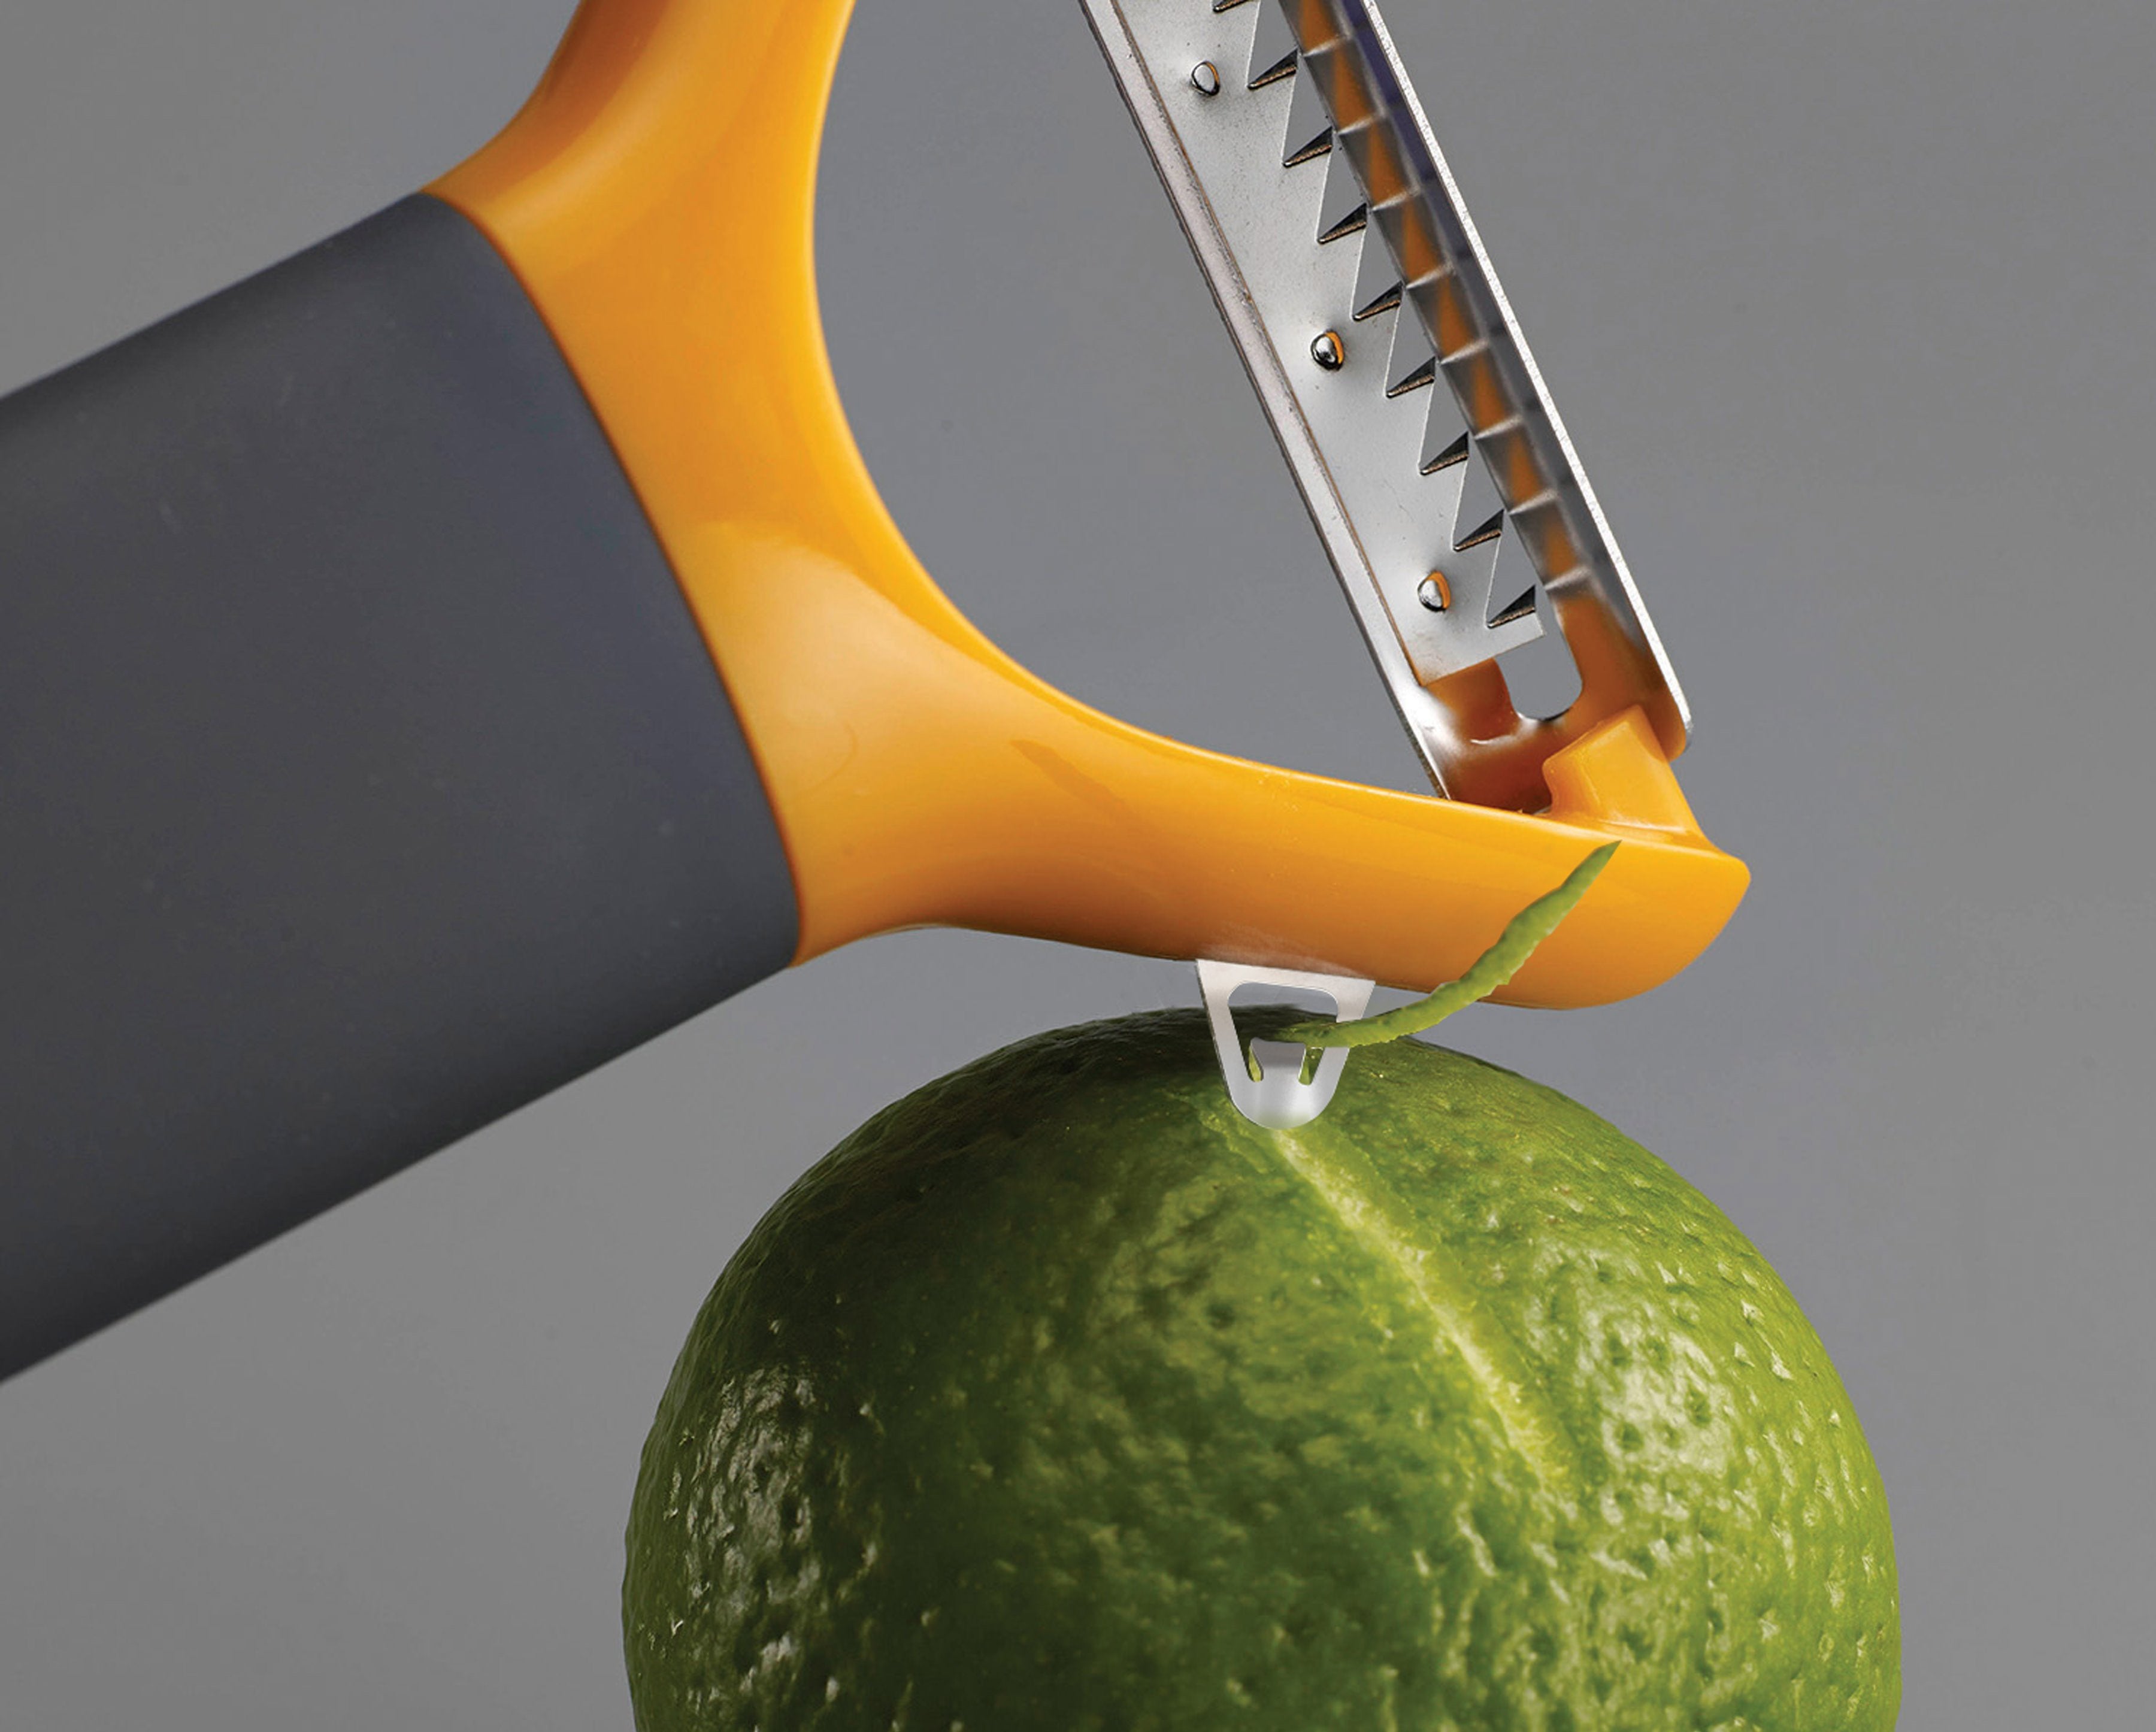 BEON.COM.AU  This julienne peeler is ideal for adding the final flourish to culinary masterpieces with a integrated channel knife on its side.  Two peeling tools in one Julienne blade for fine strips Handy channel knife for creating garnishes Ergonomic handle Stainless-steel blade  Specifications Care & ... Joseph Joseph at BEON.COM.AU